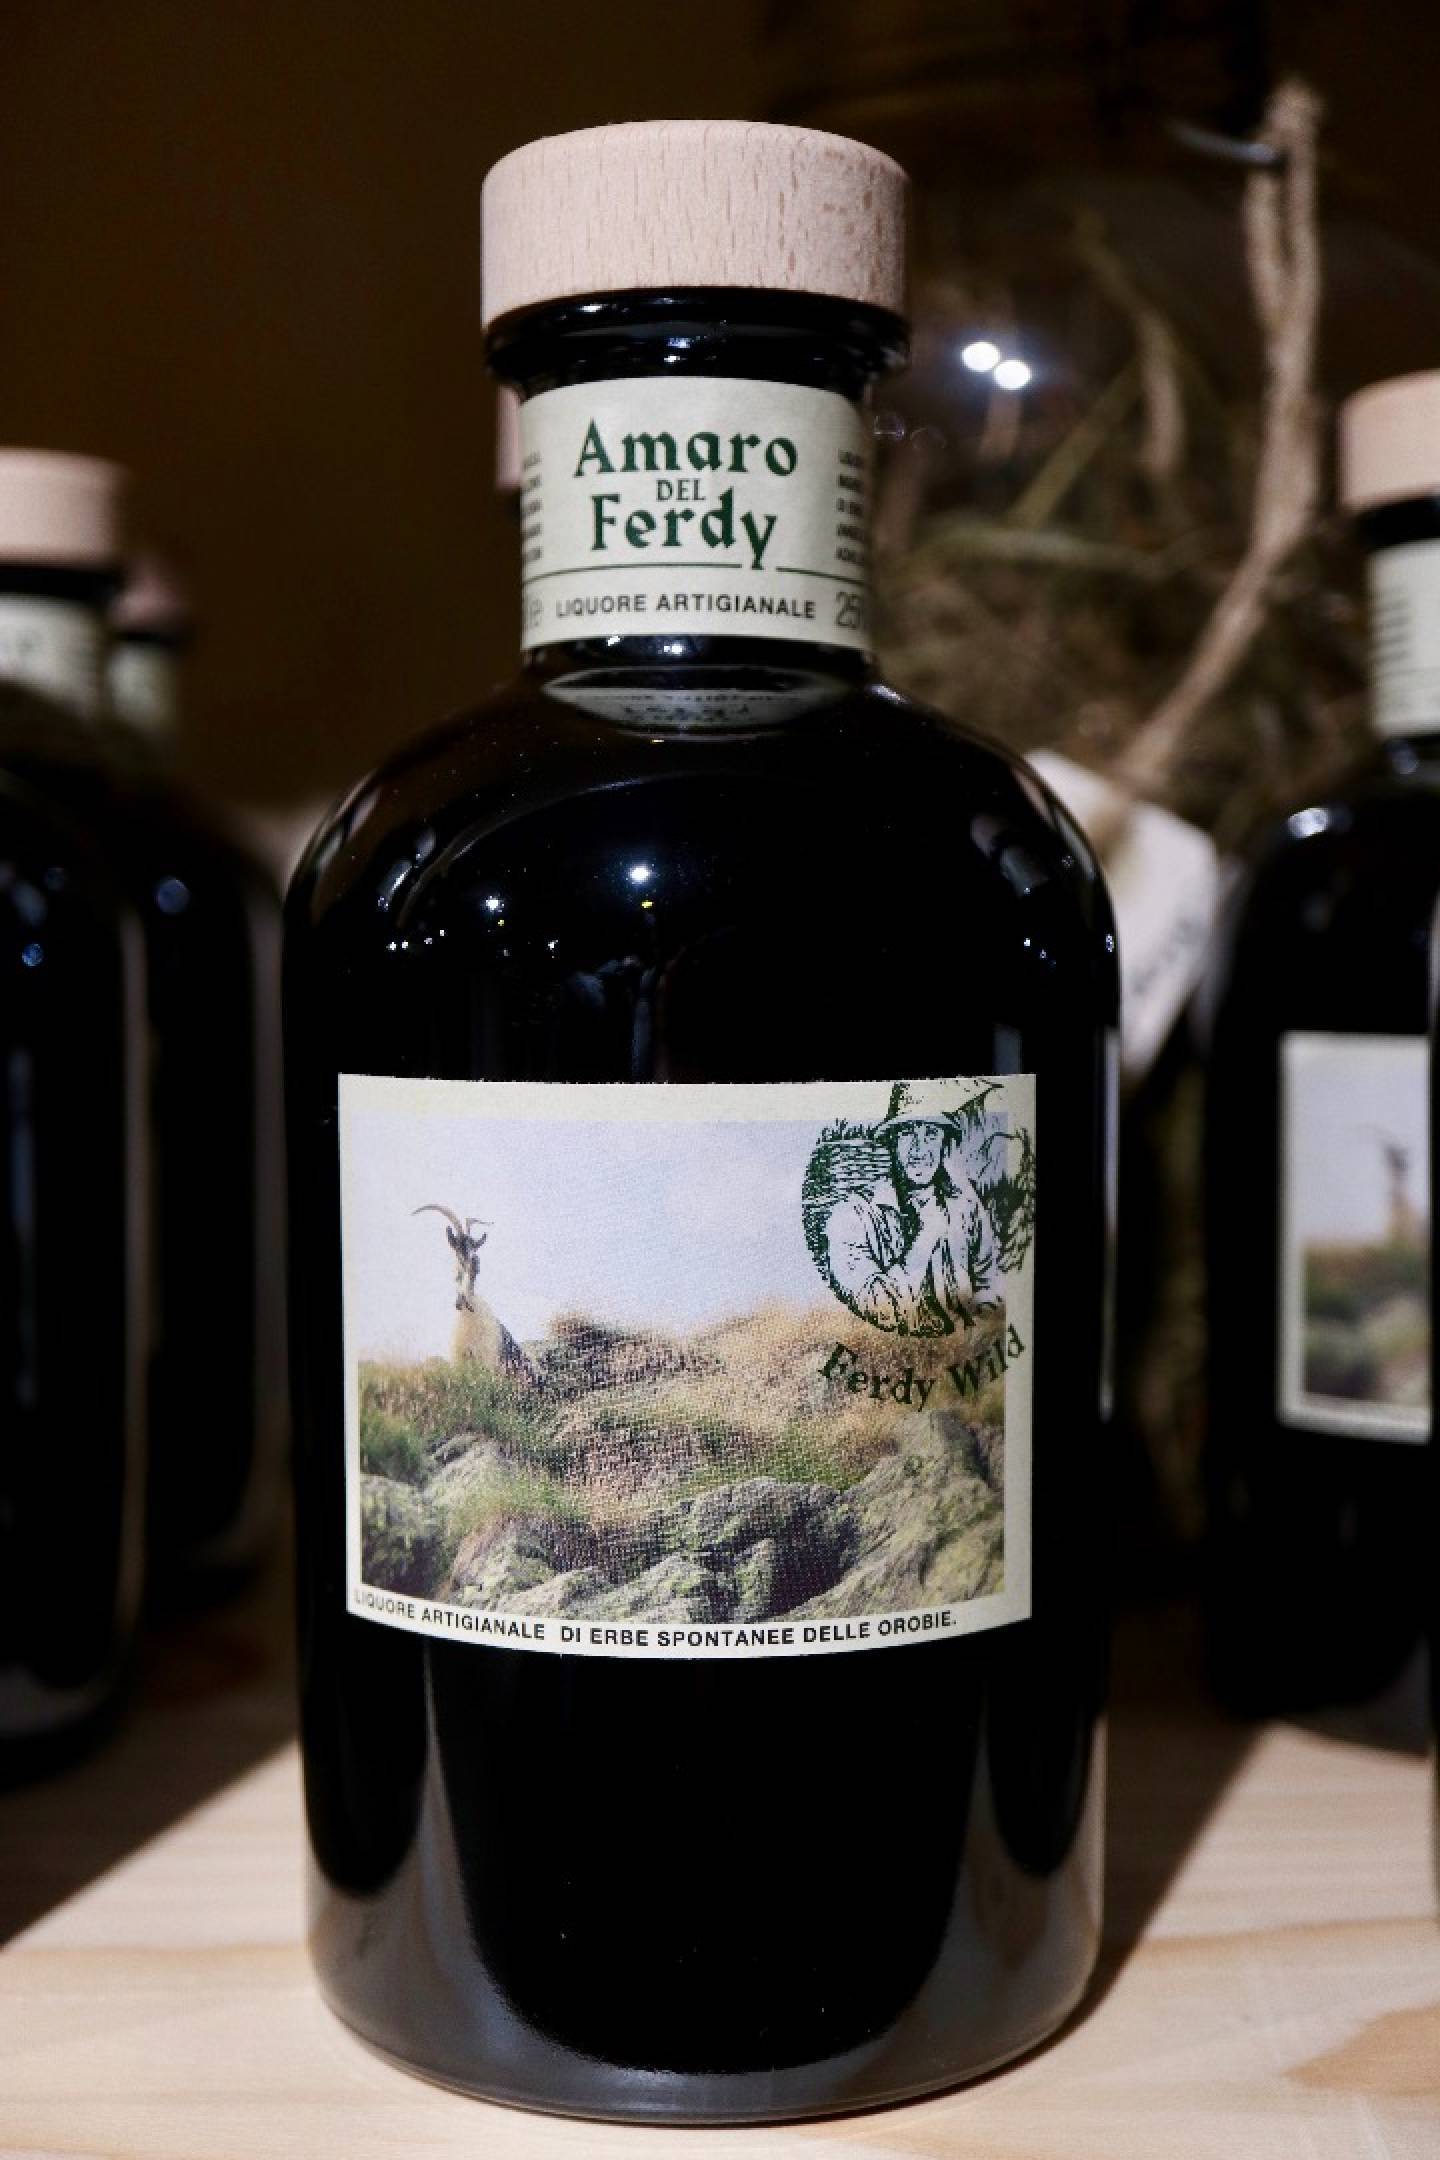 Our Amaro del Ferdy herbs liquor dresses up with a new style!